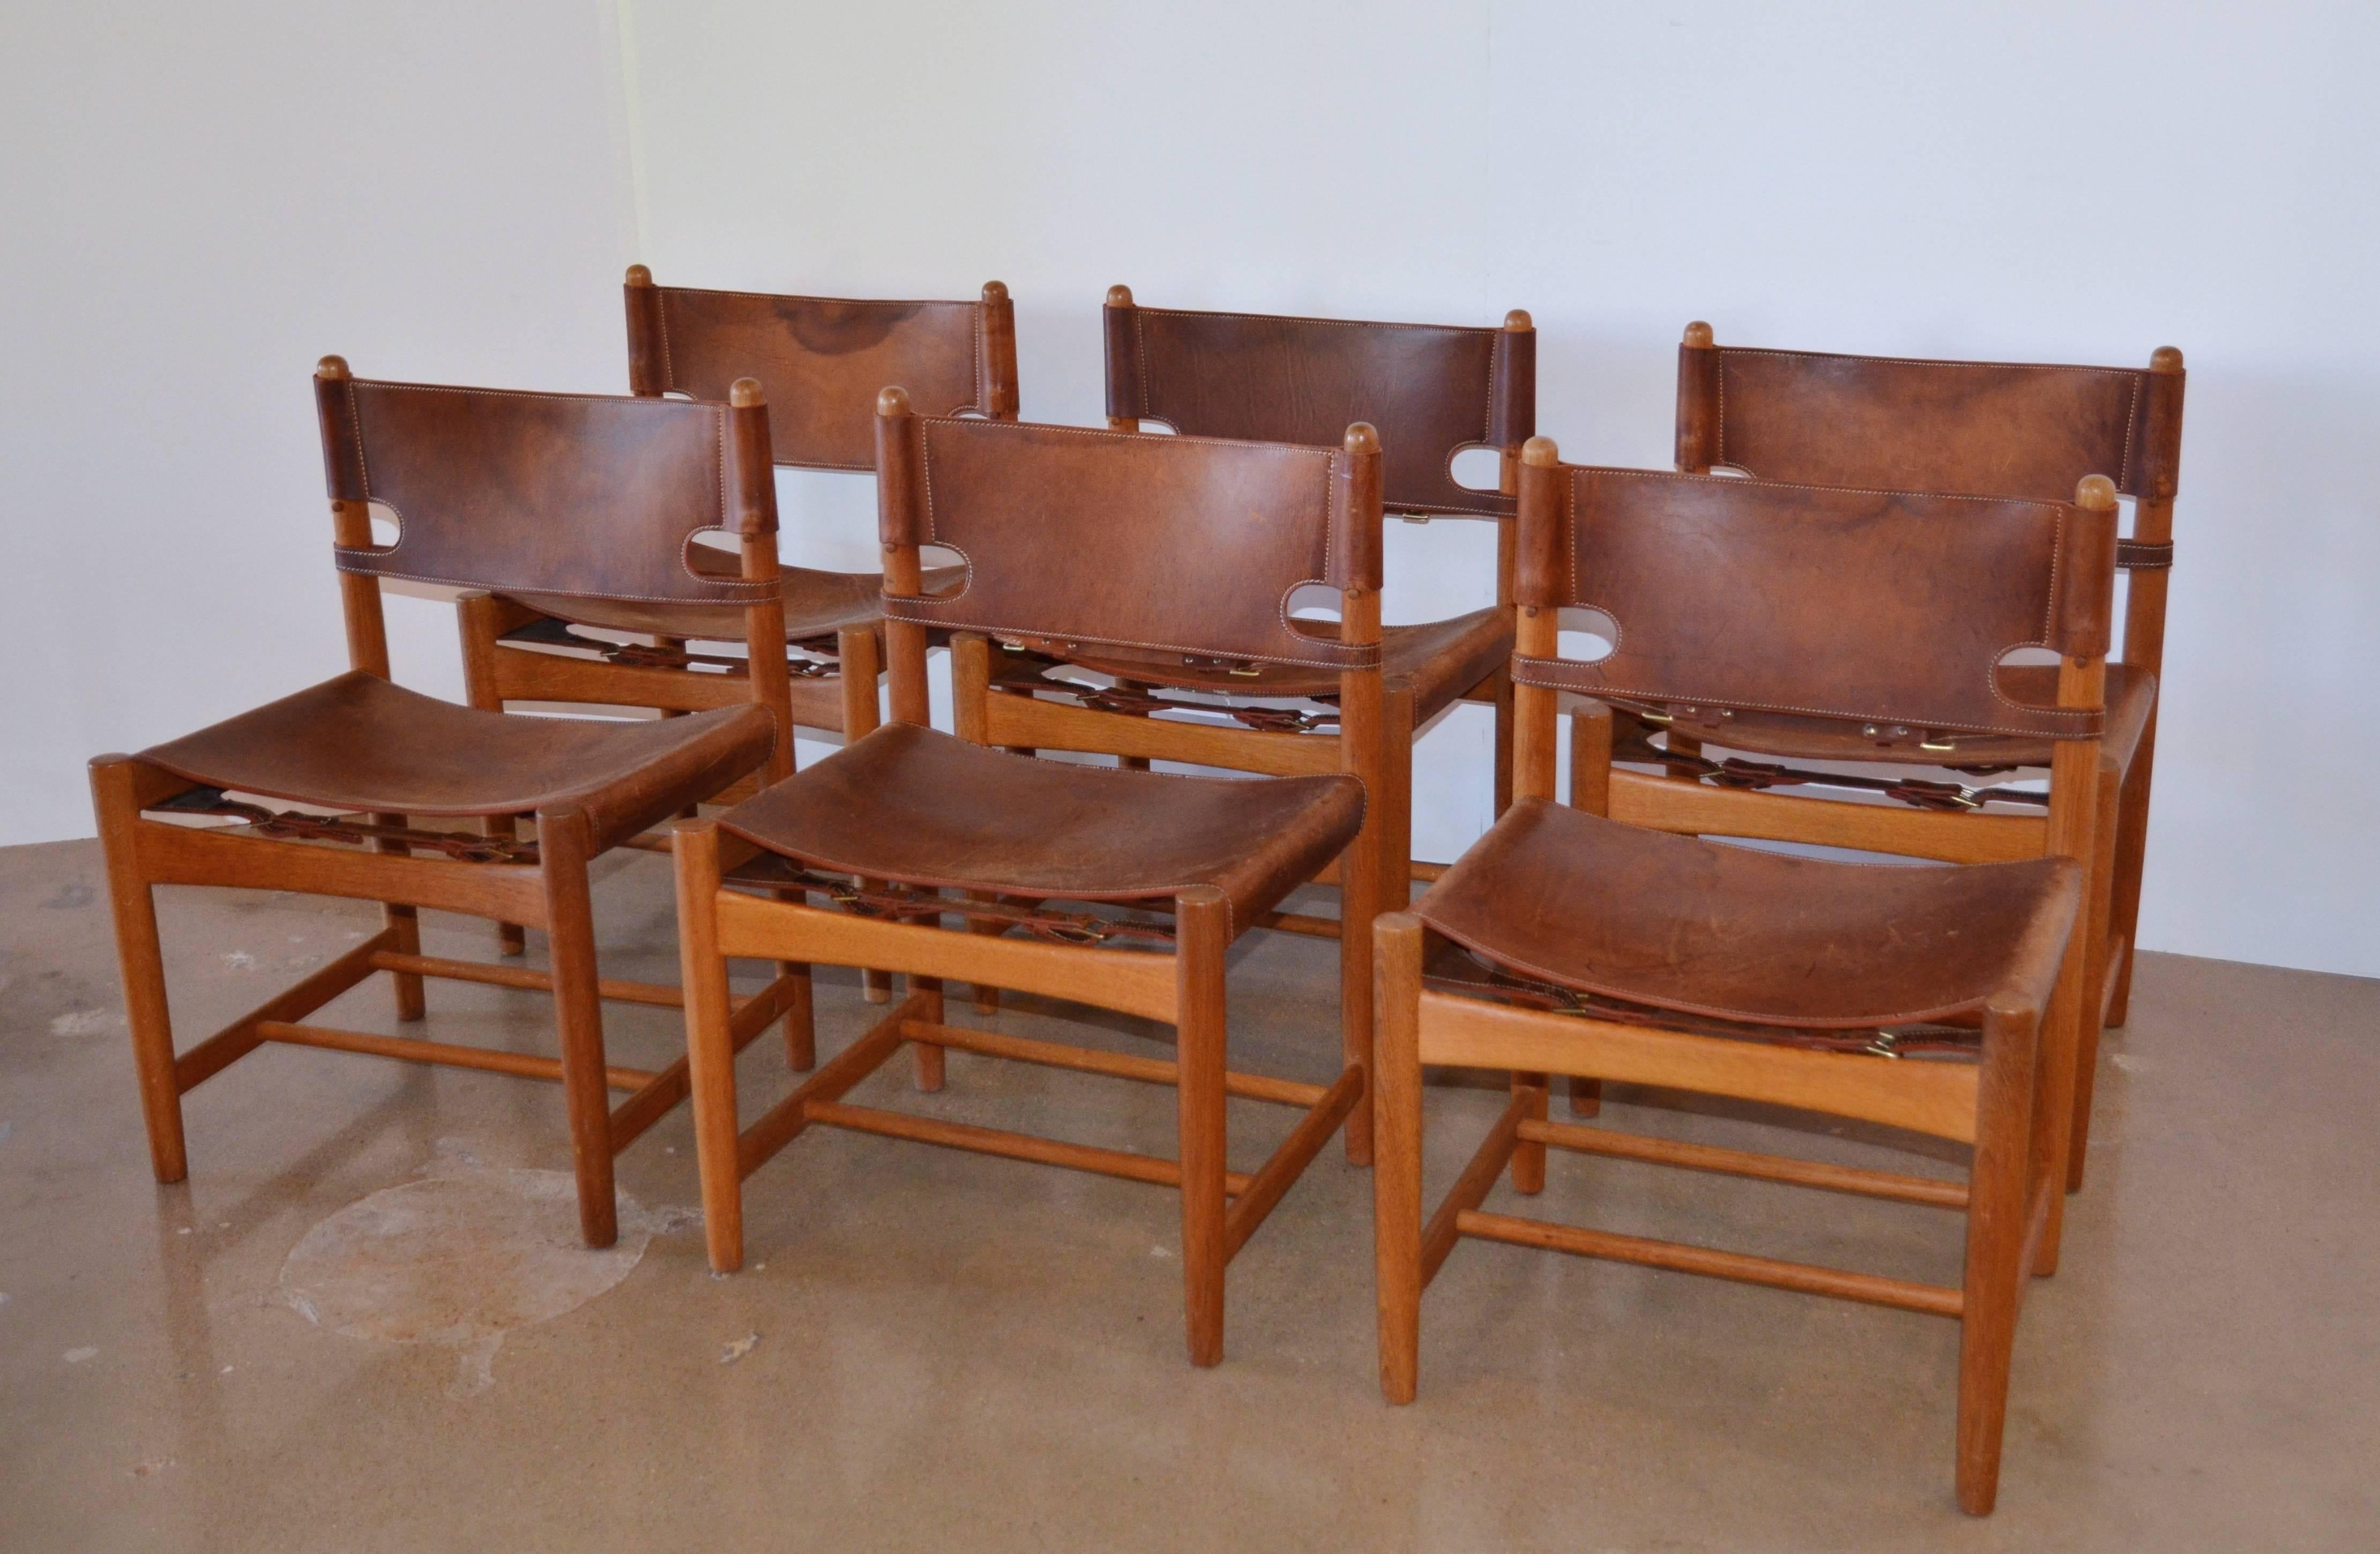 Hard to find pair (three pairs available) of Børge Mogensen Hunting chairs model 3237. Produced by Fredericia Furniture with partial labels remaining on two of the six chairs, see photographs. Oak frames have original saddle leather backs and seats